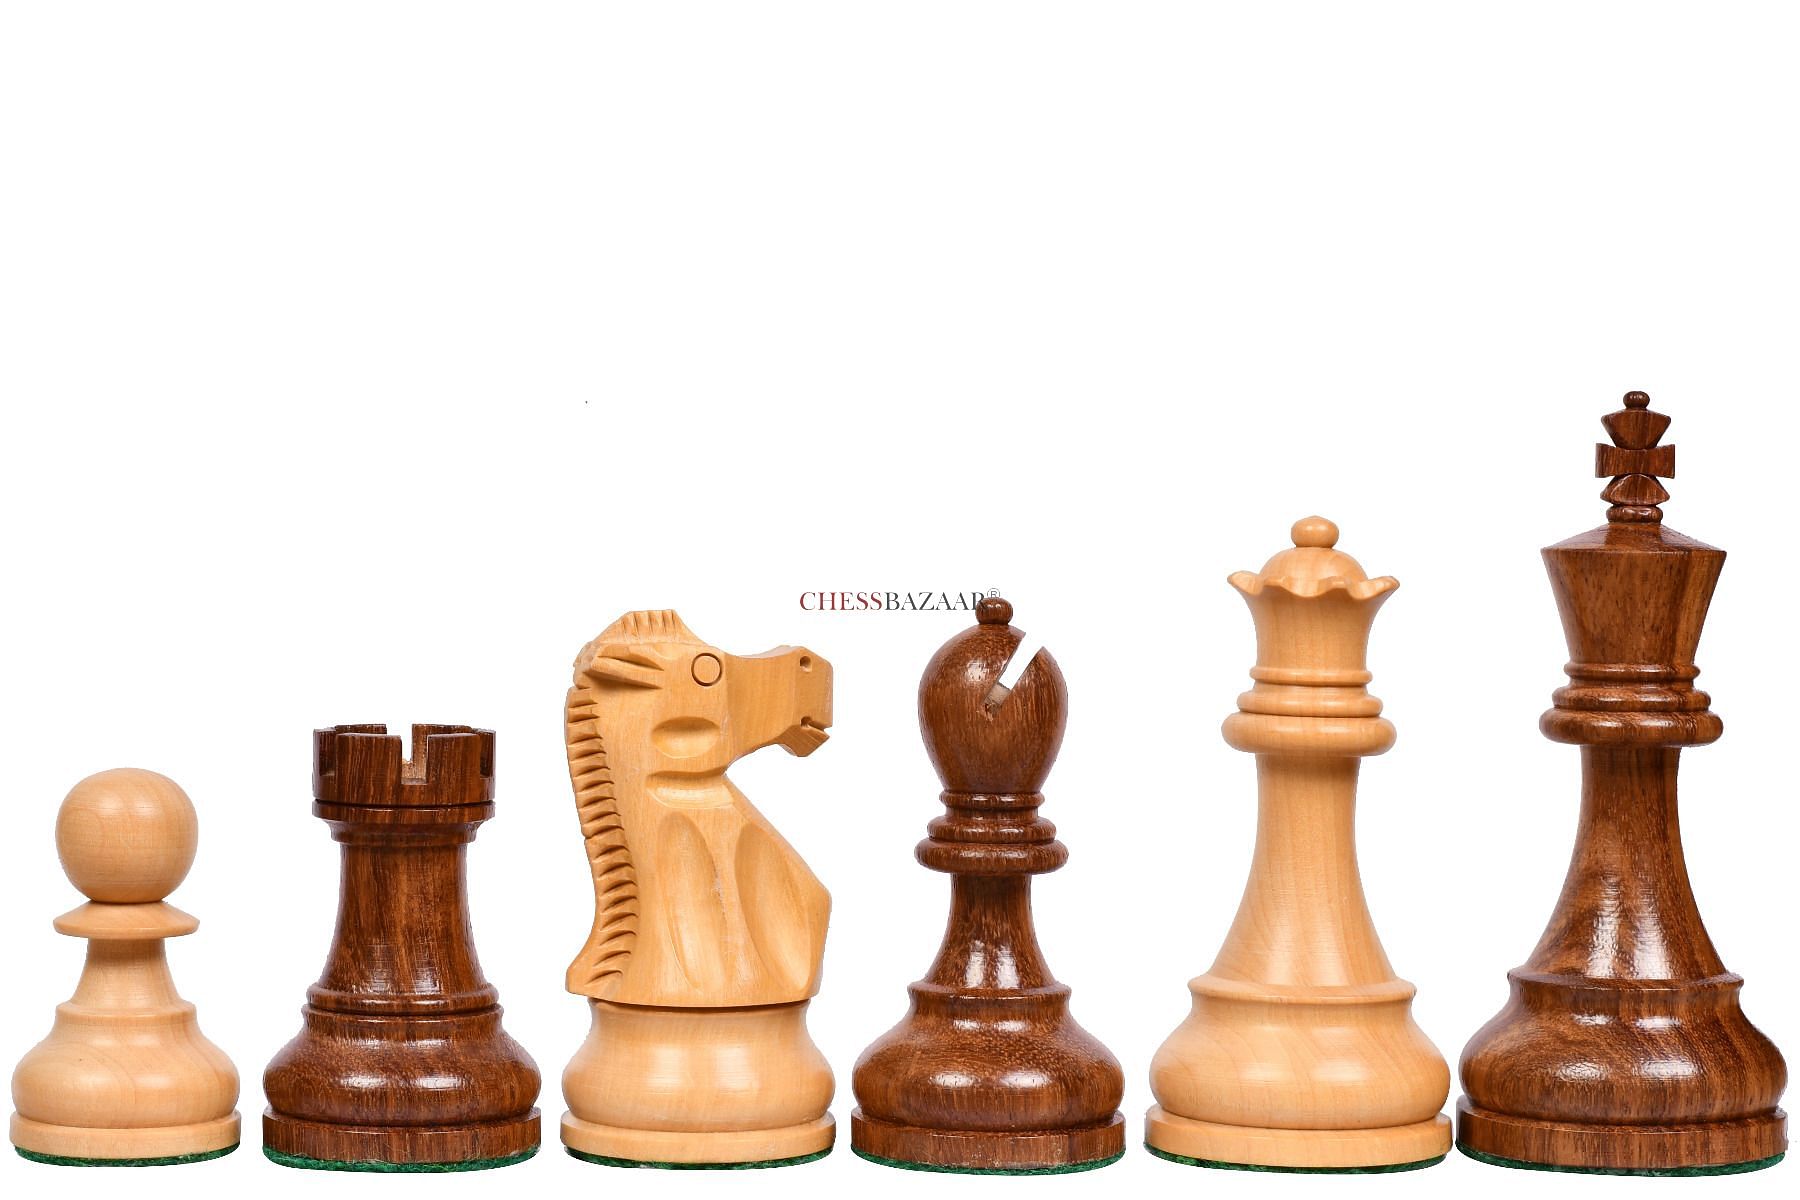 Reproduced 1972 Reykjavik Championship Series Chess Pieces in Sheesham ...